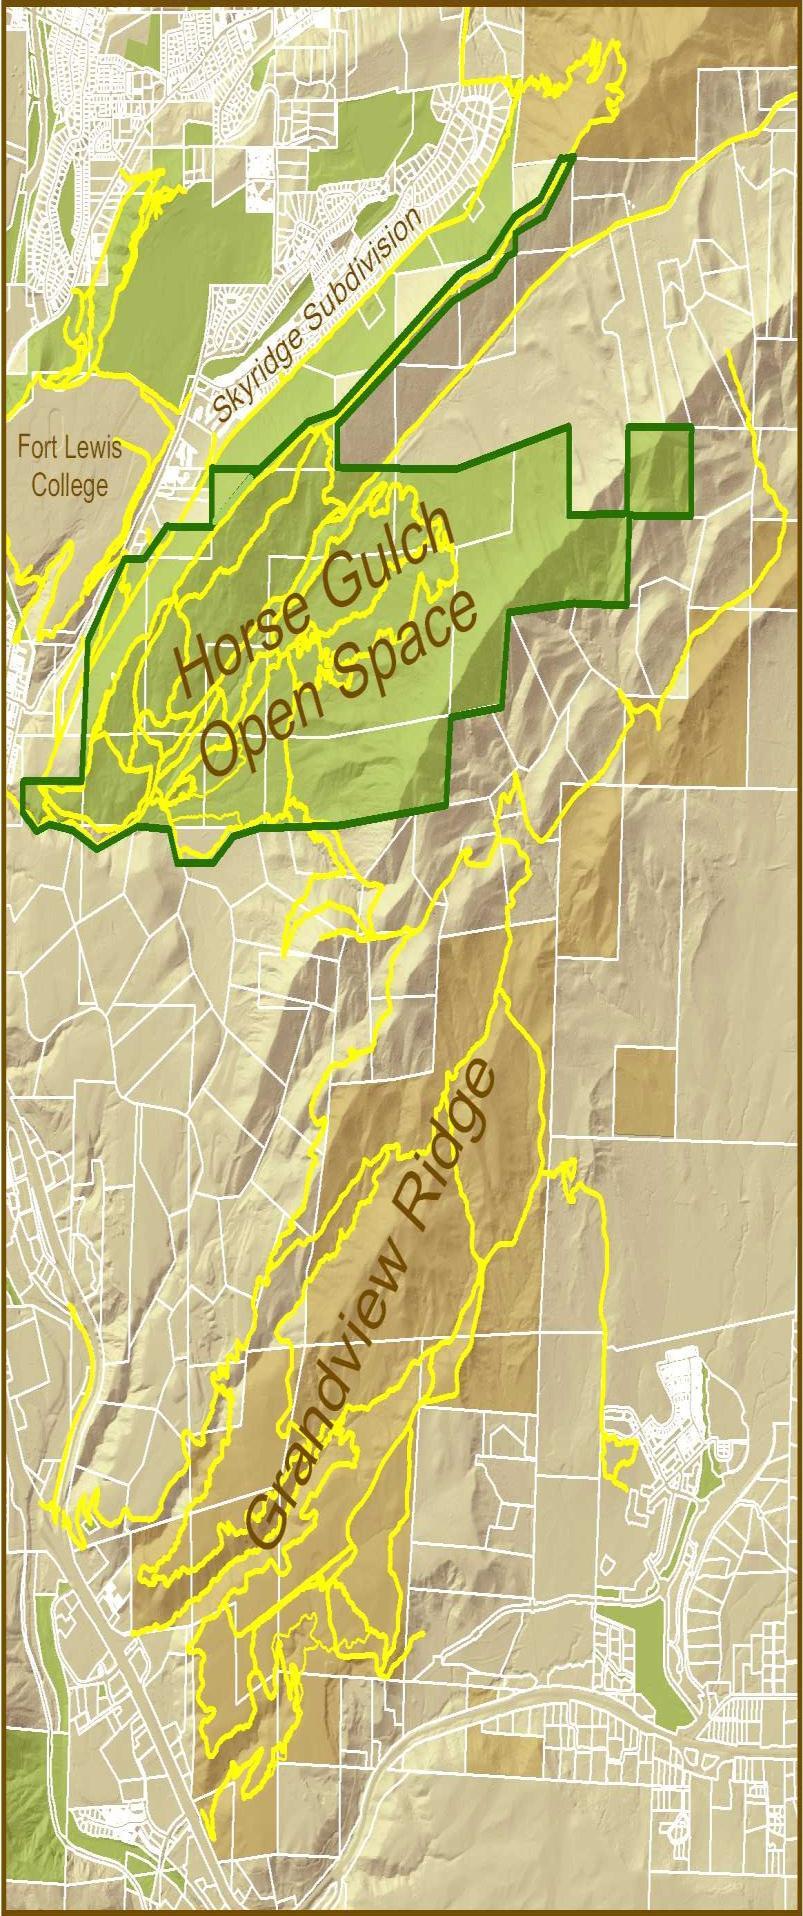 available for review at the City of Durango Parks and Recreation Department and on the City website. A map of lands preserved in Horse Gulch, including those under easement, is attached to this plan.